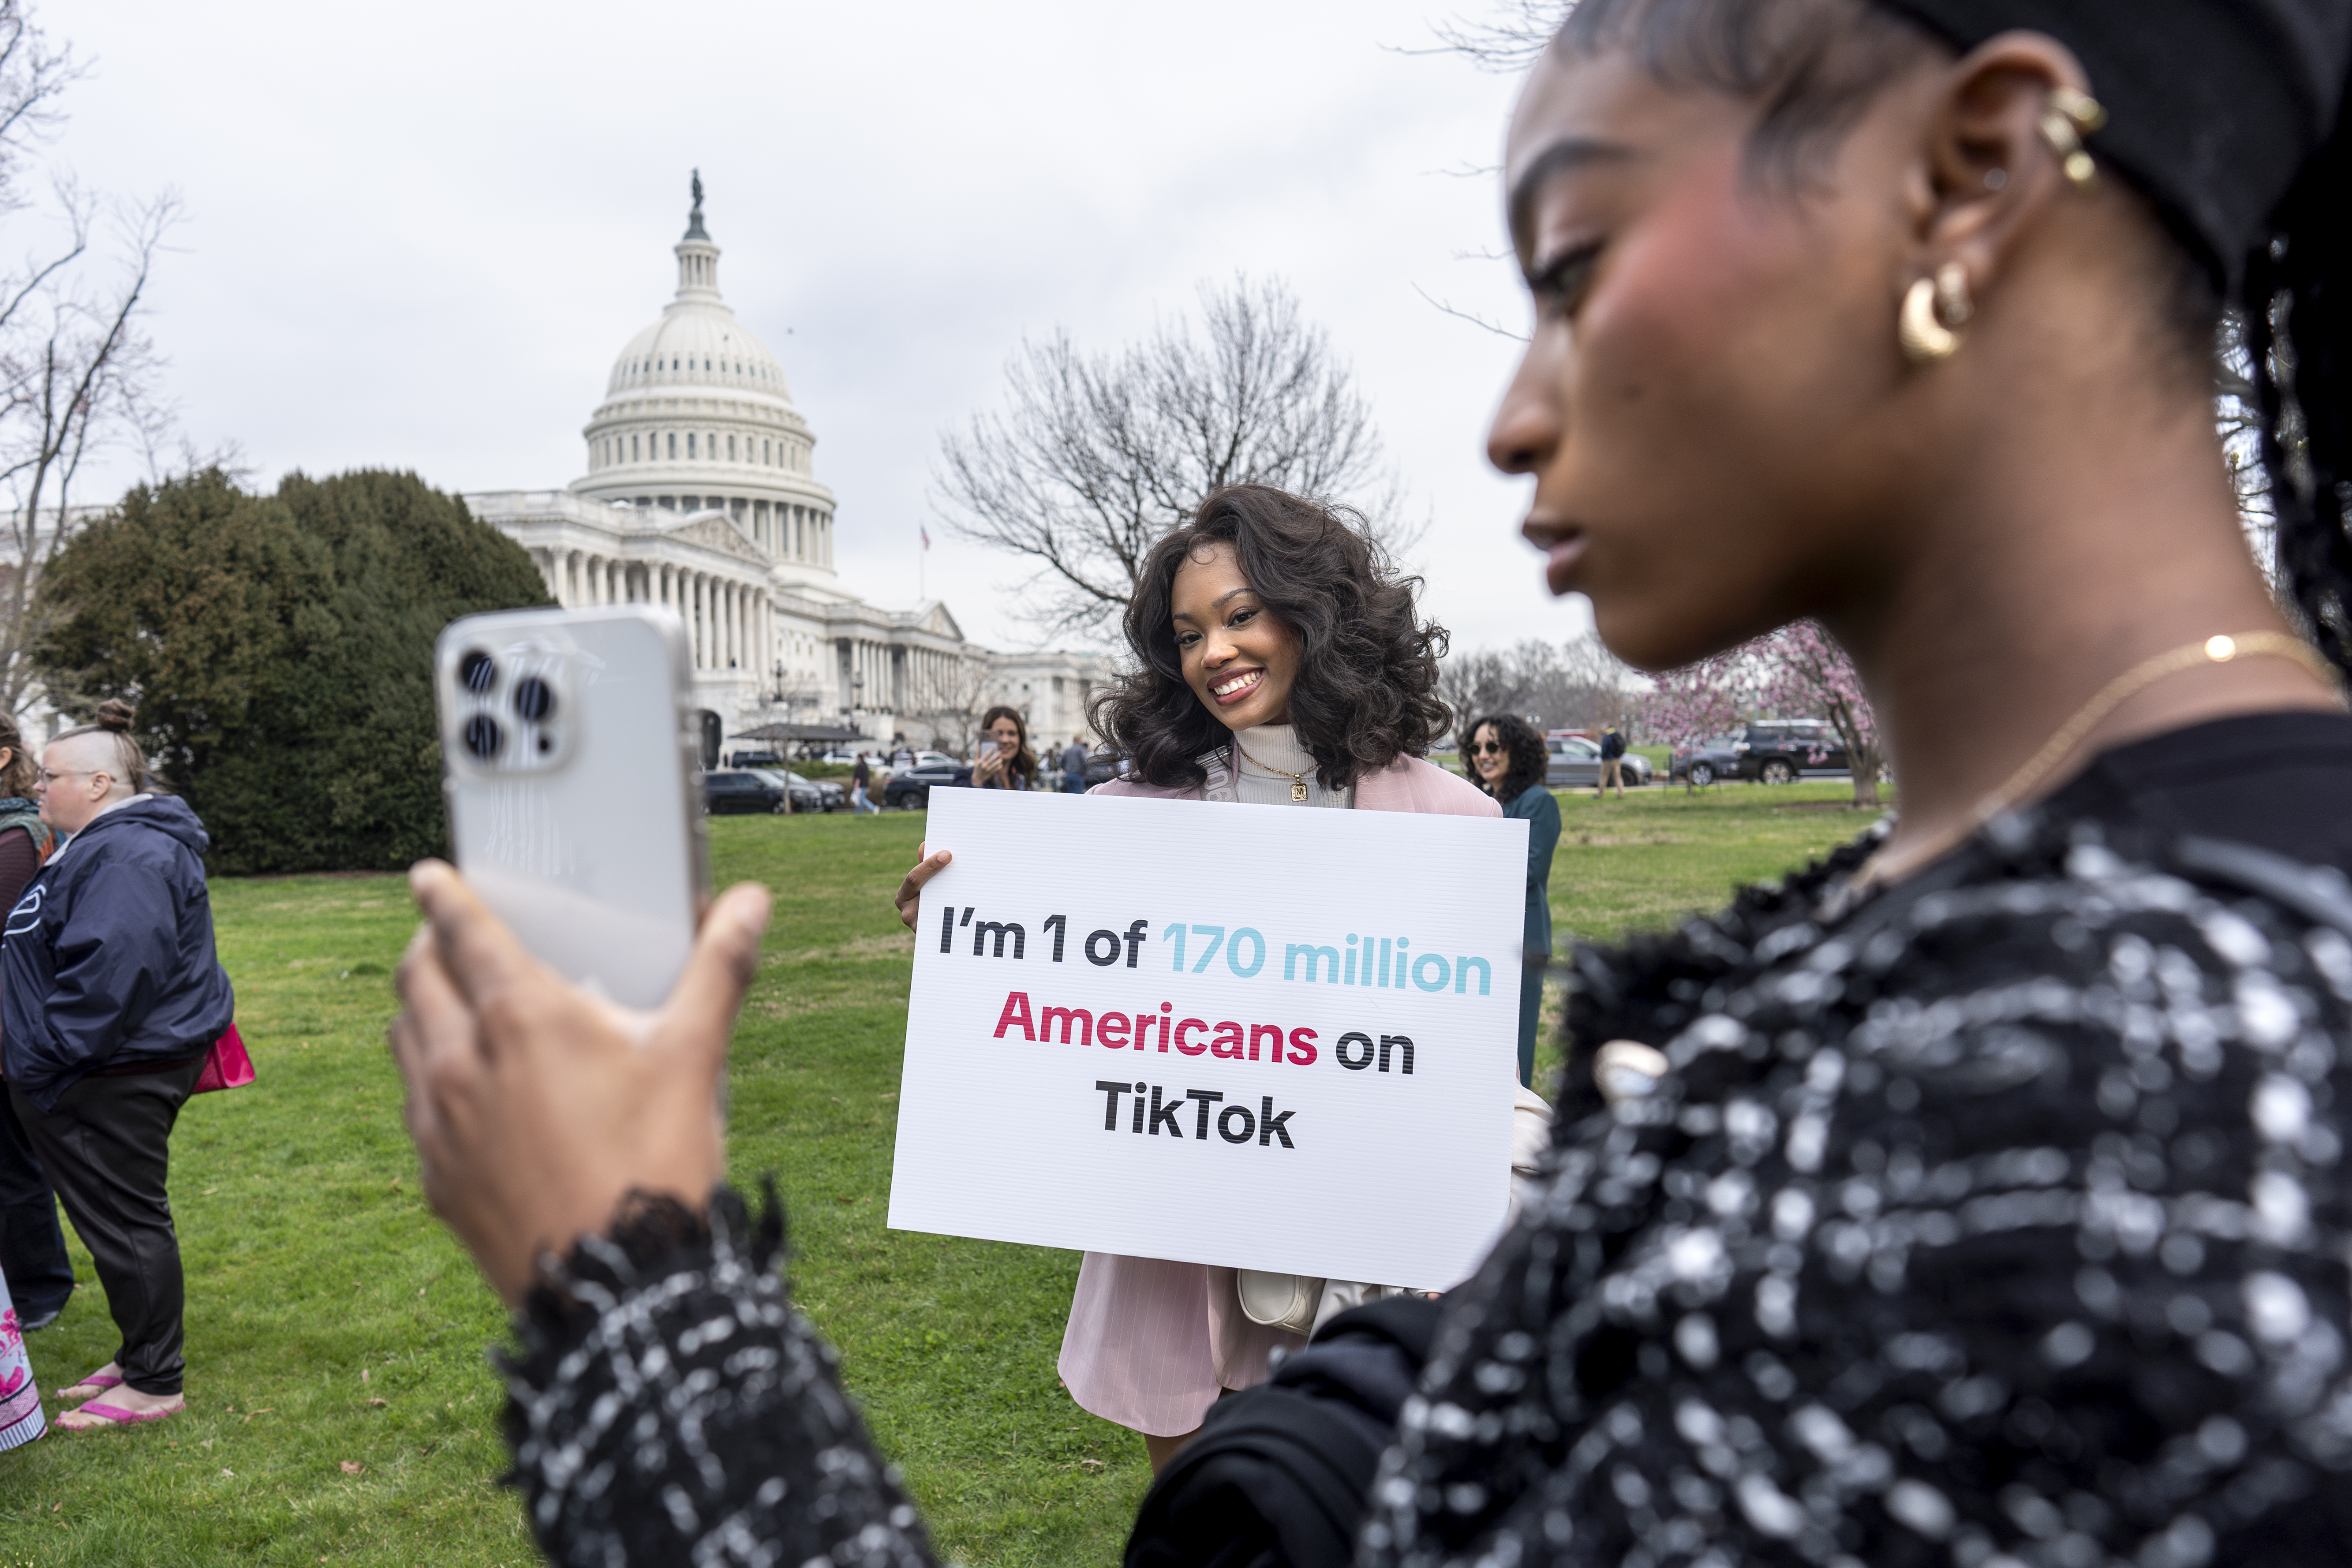 TikTok bill faces uncertain fate as tech company carries out
aggressive campaign against it